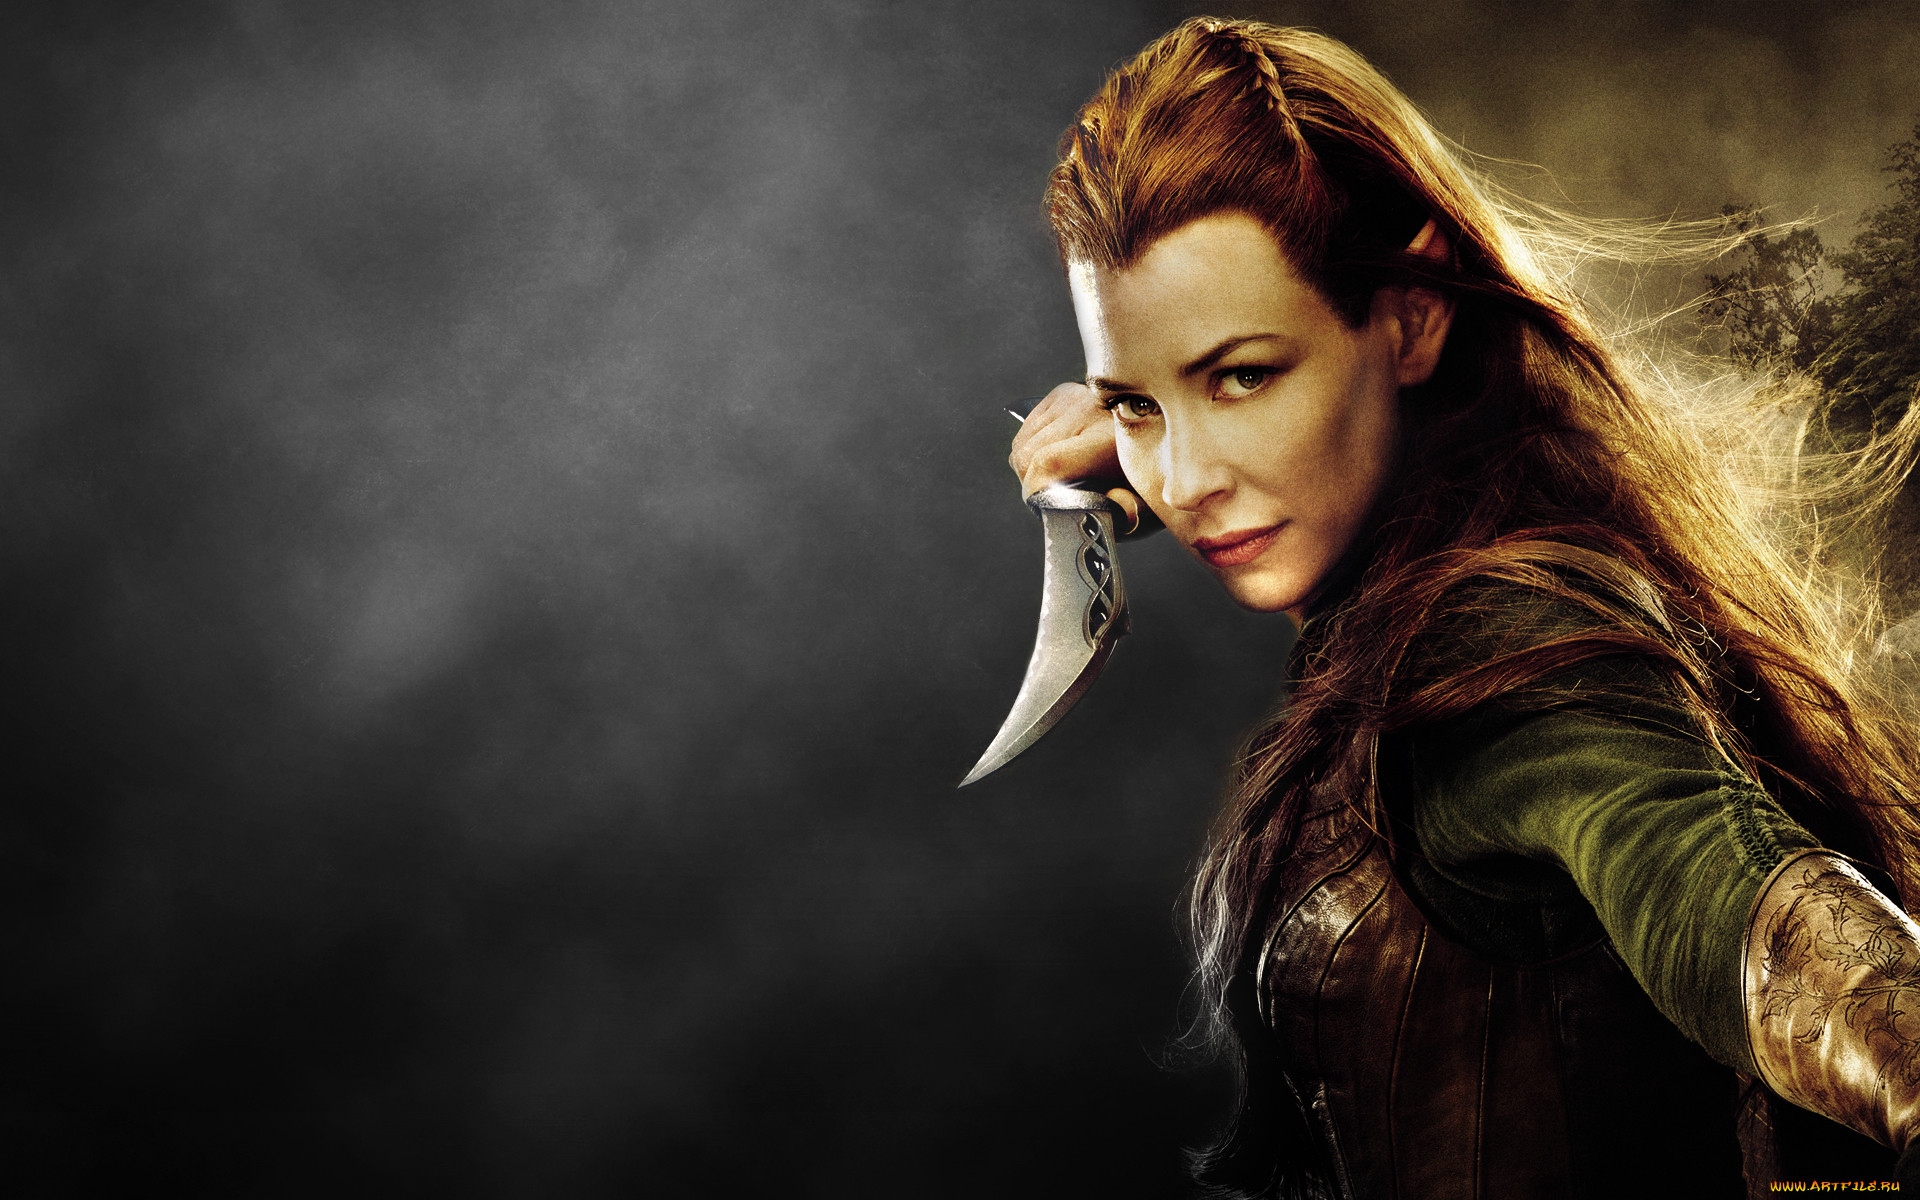   ,  , the hobbit,  the desolation of smaug, , , , the, hobbit, desolation, of, smaug, evangeline, lilly, , 